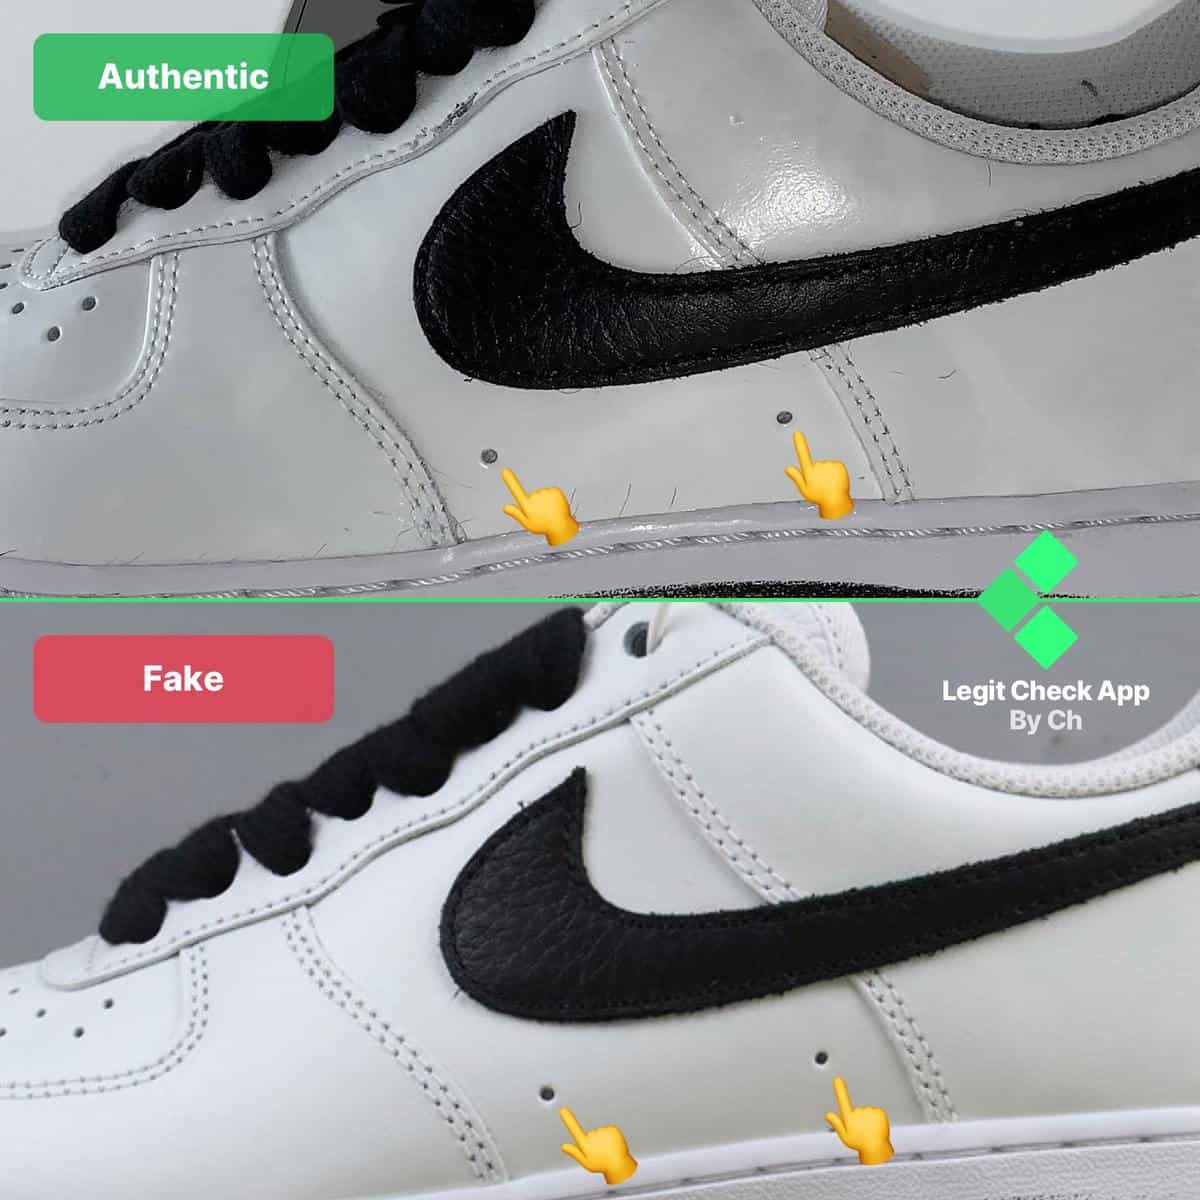 Fake Vs Real Nike Air Force 1s (5 DIFFERENCES) 